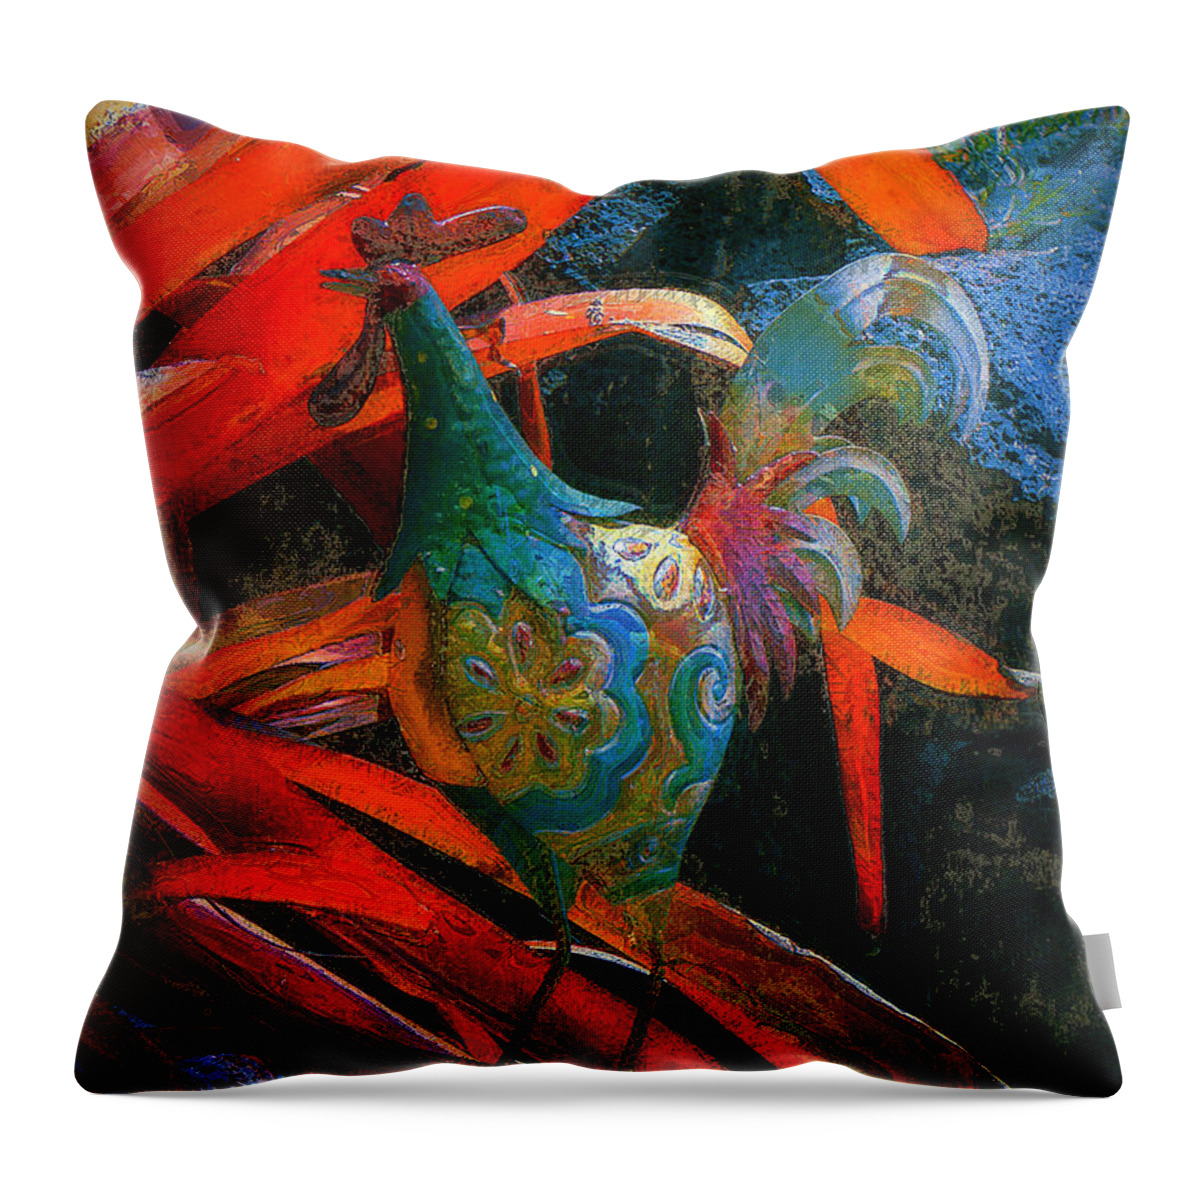 Chicken Throw Pillow featuring the photograph Garden Rooster by Lori Seaman